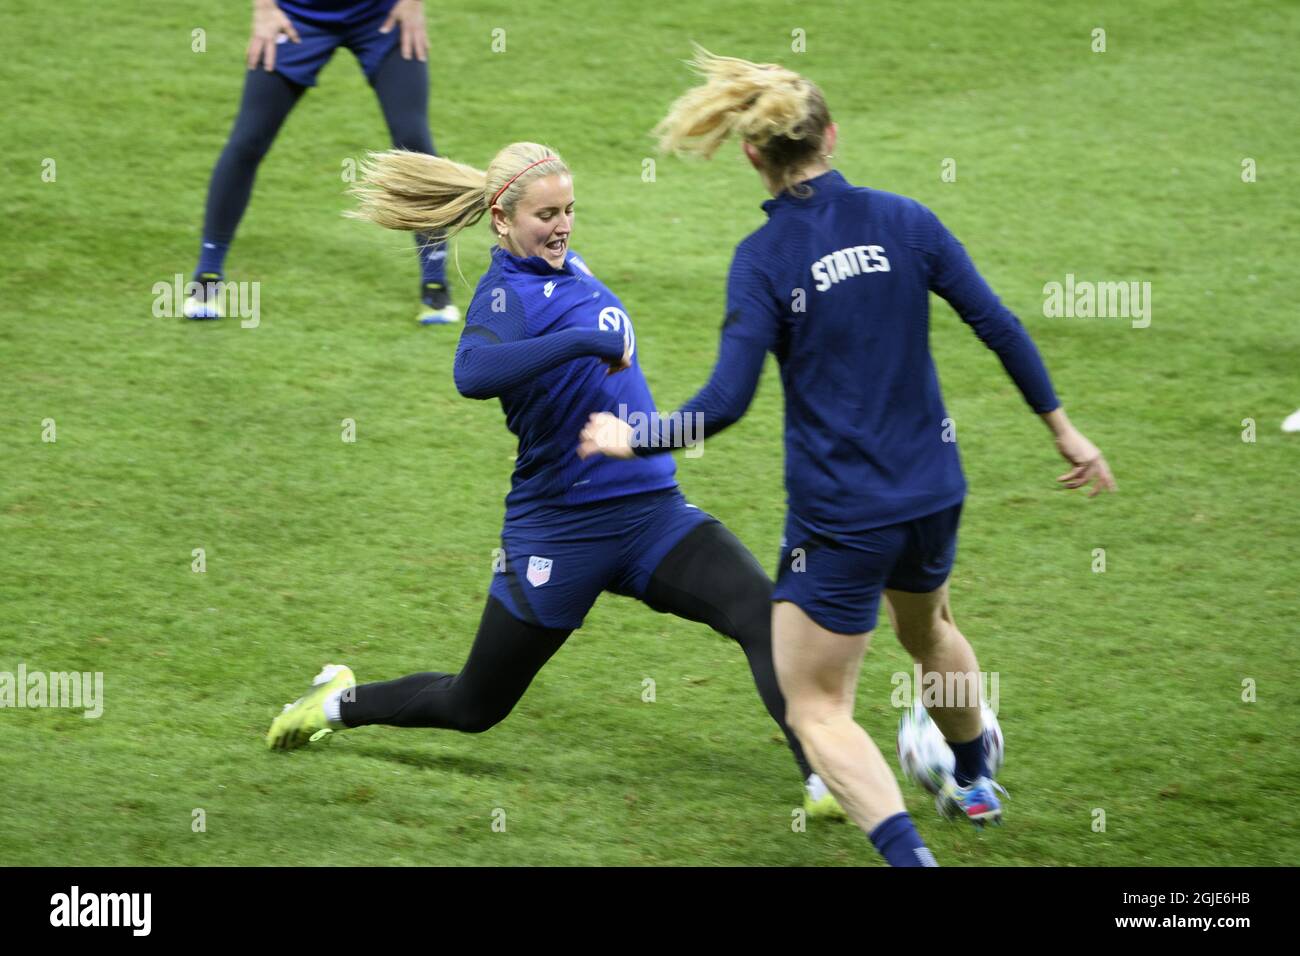 Lindsey Horan (L) in action during a USA women's national team training session at Friends arena in Stockholm, Sweden, on Friday April 9, 2021. USA will meet Sweden in a friendly international game on Saturday. Photo: Henrik Montgomery / TT / kod 10060 *** SWEDEN OUT ***  Stock Photo